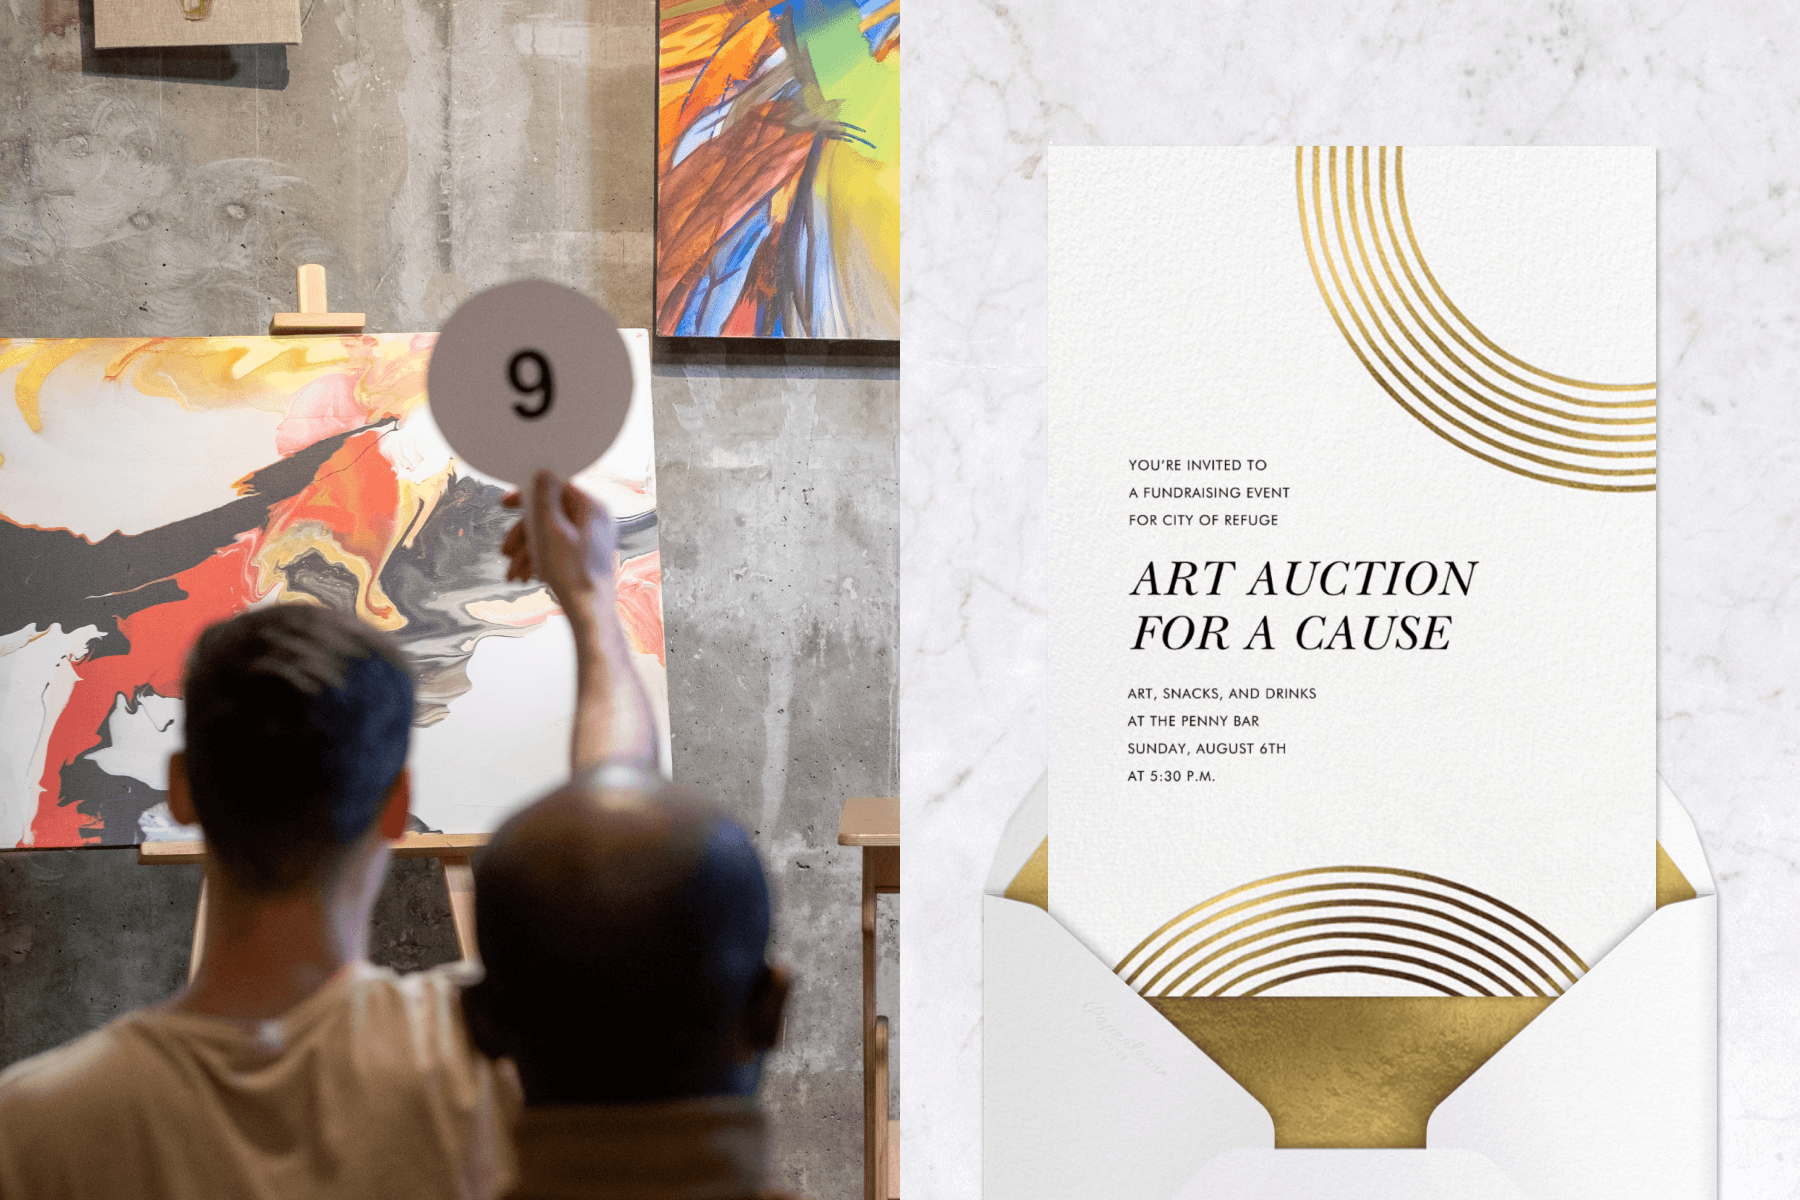 Left: A man holds up a 9 paddle in front of a painting at an art auction. Right: An art auction invitation with gold arches on the bottom and upper right corner.